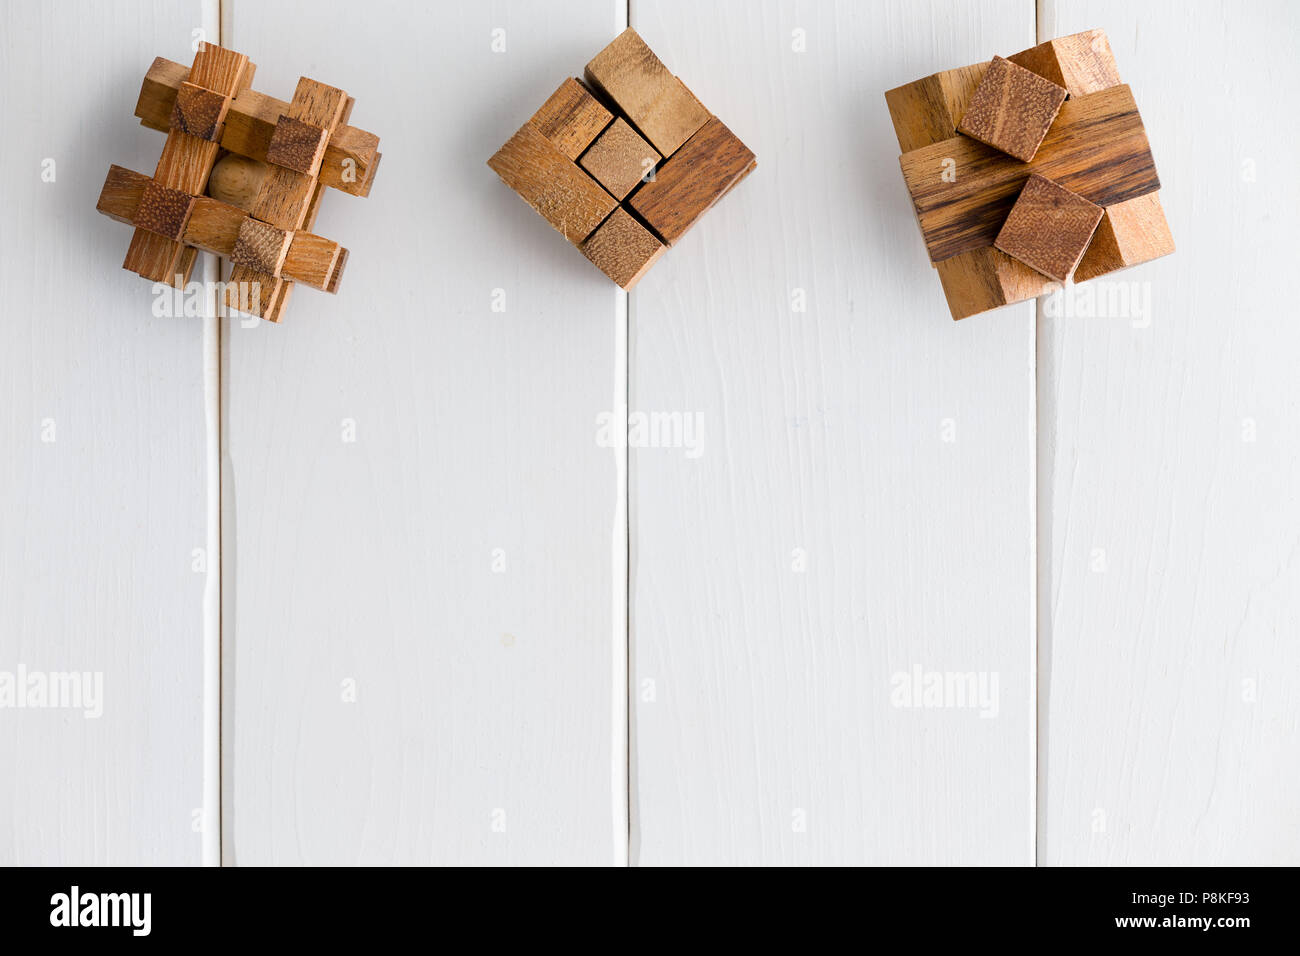 Three geometric interlocked wooden puzzles arranged in a neat line as a top border on white painted wood boards with copy space Stock Photo